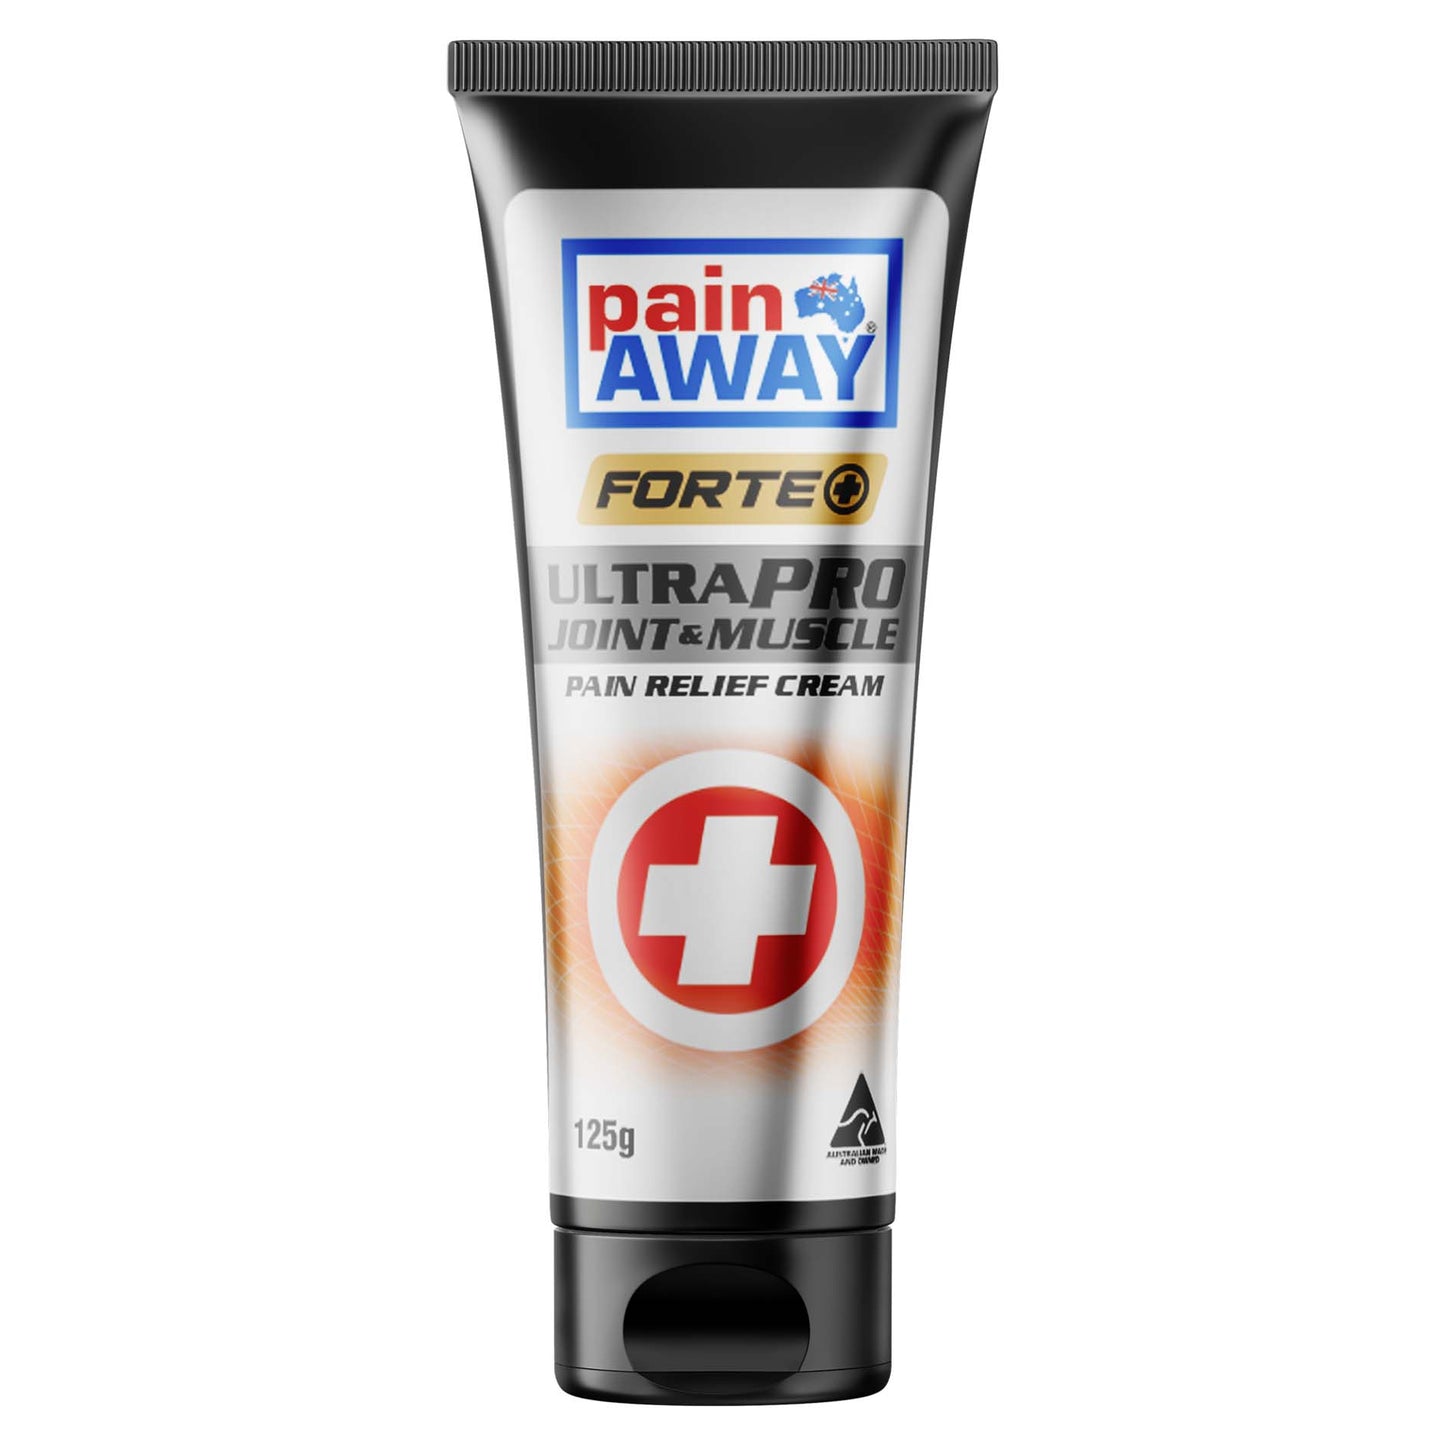 PAIN AWAY FORTE+ ULTRA PRO JOINT & MUSCLE PAIN RELIEF CREAM 125G TUBE